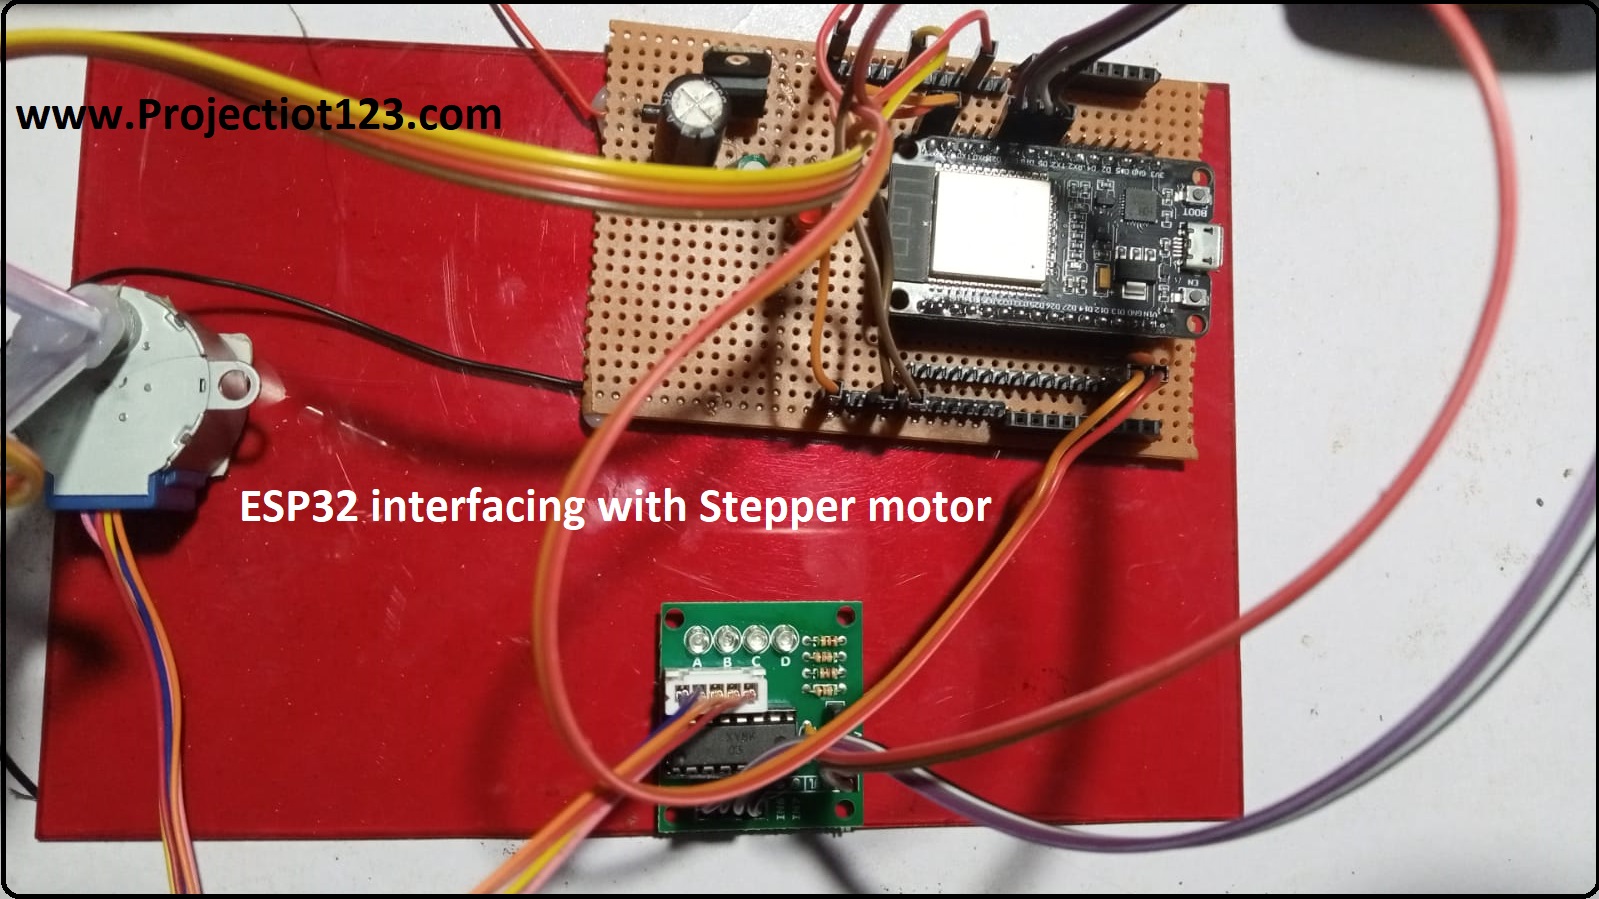 ESP32 interfacing with Stepper motor Project